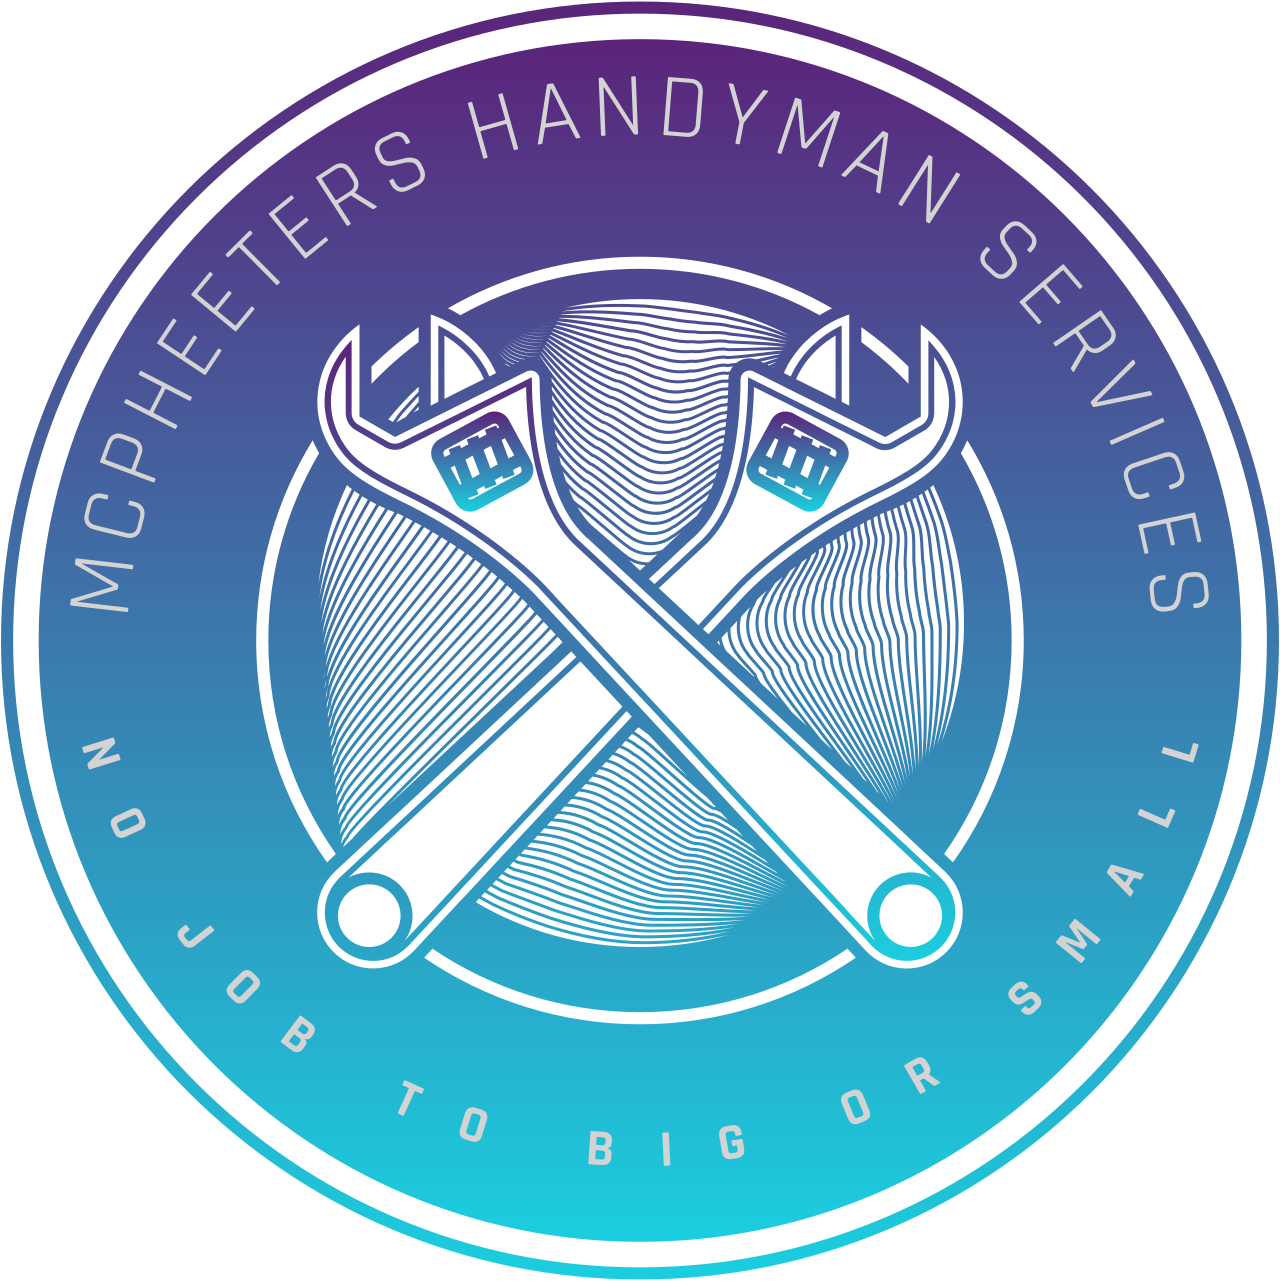 MCPHEETERS HANDYMAN SERVICES's web page